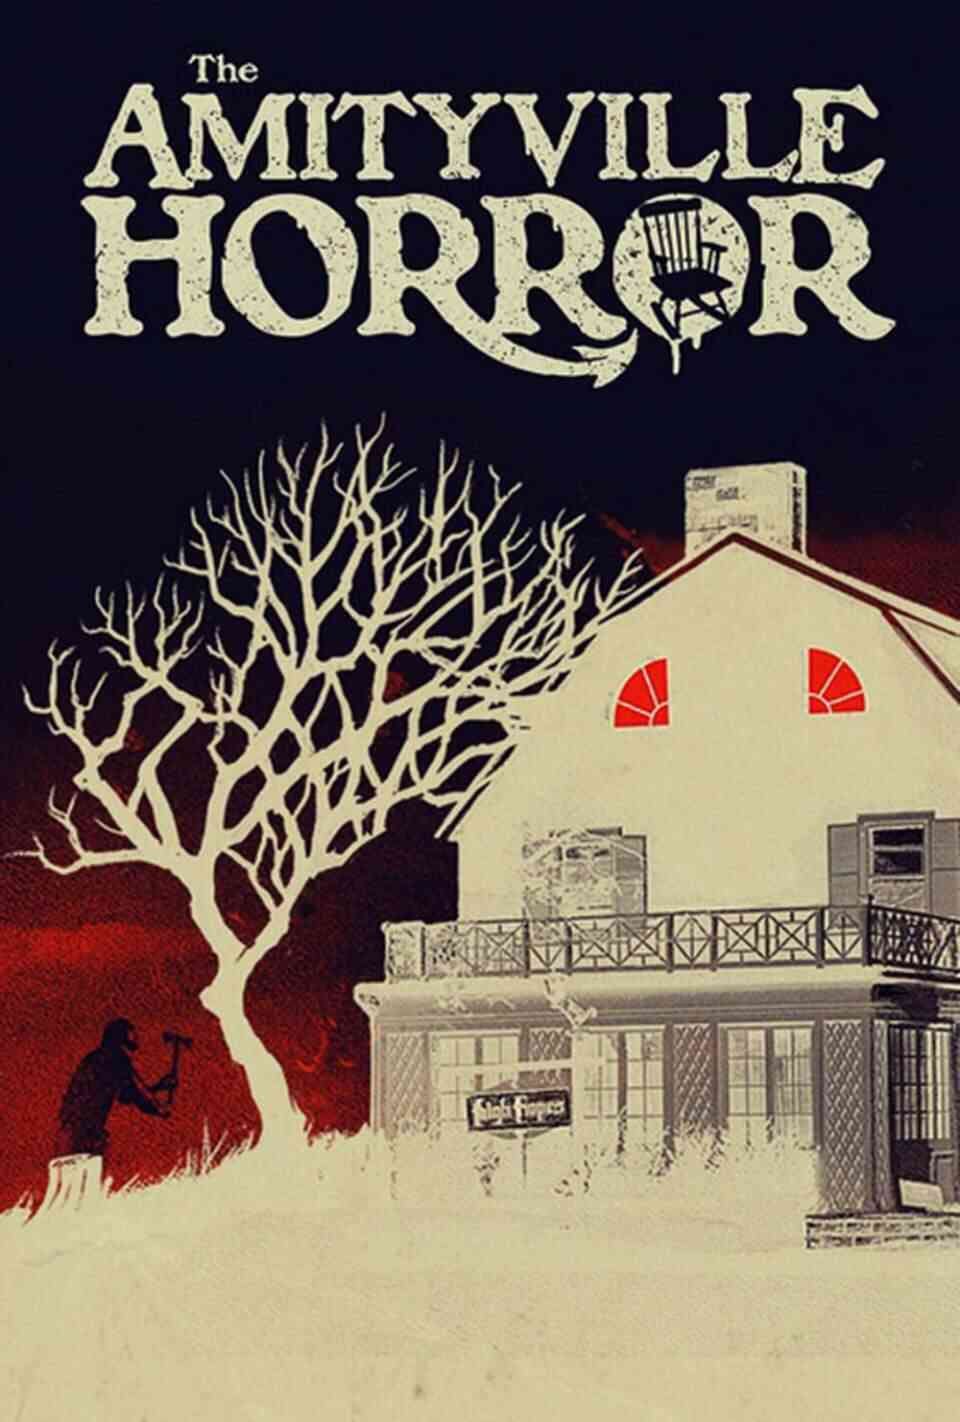 Read The Amityville Horror screenplay (poster)